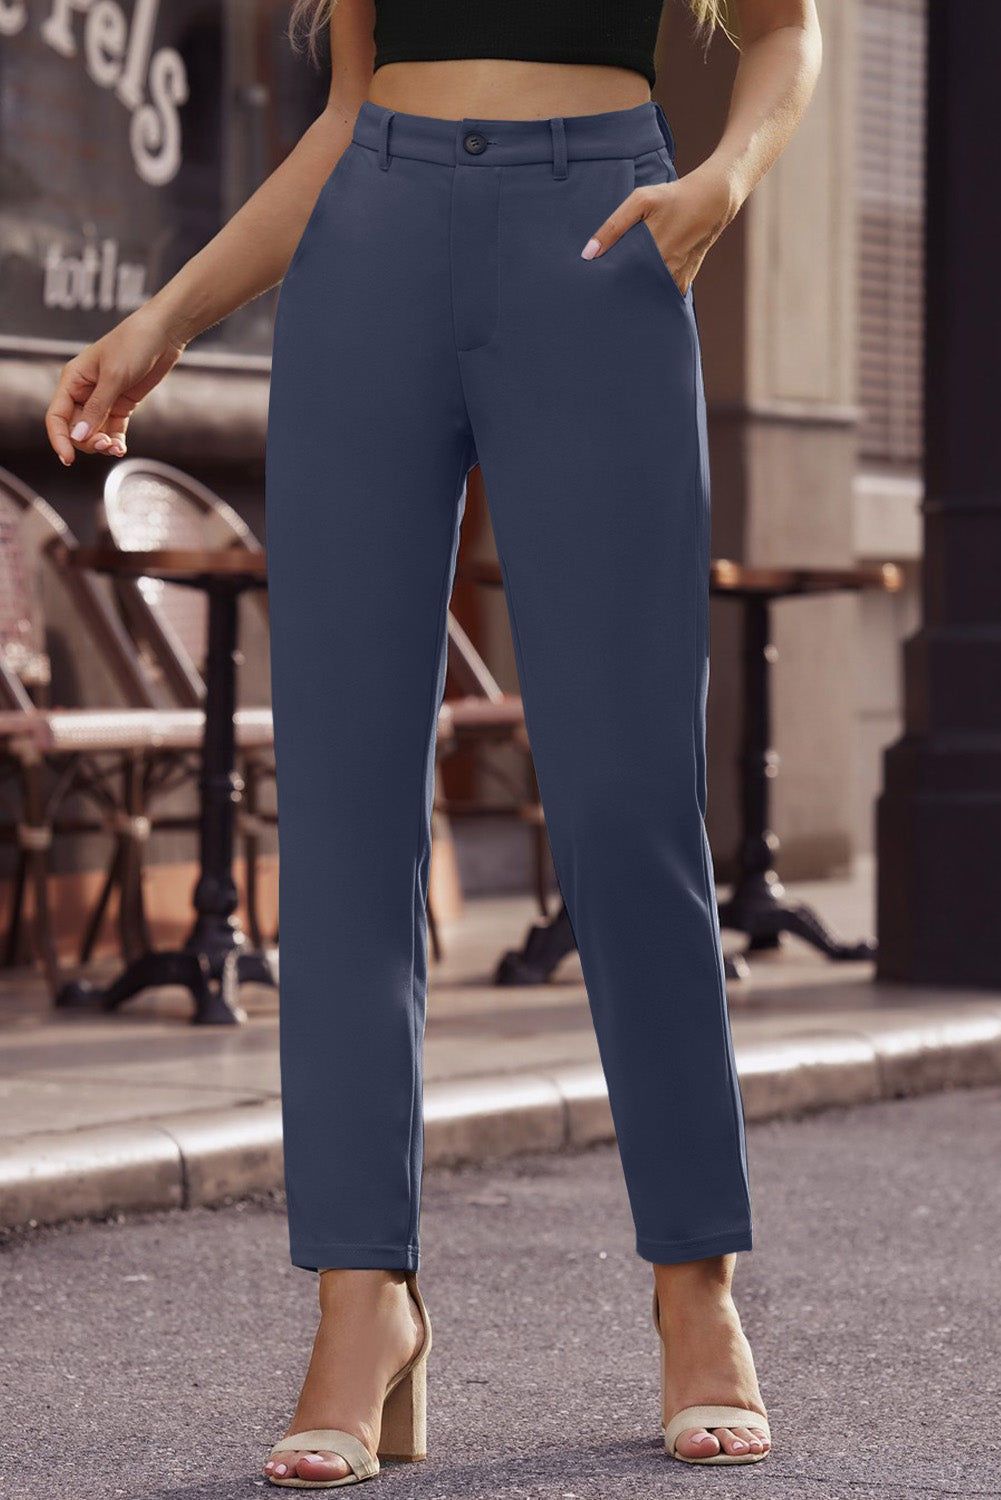 Women’s Ankle-Length Straight Leg Pants with Pockets